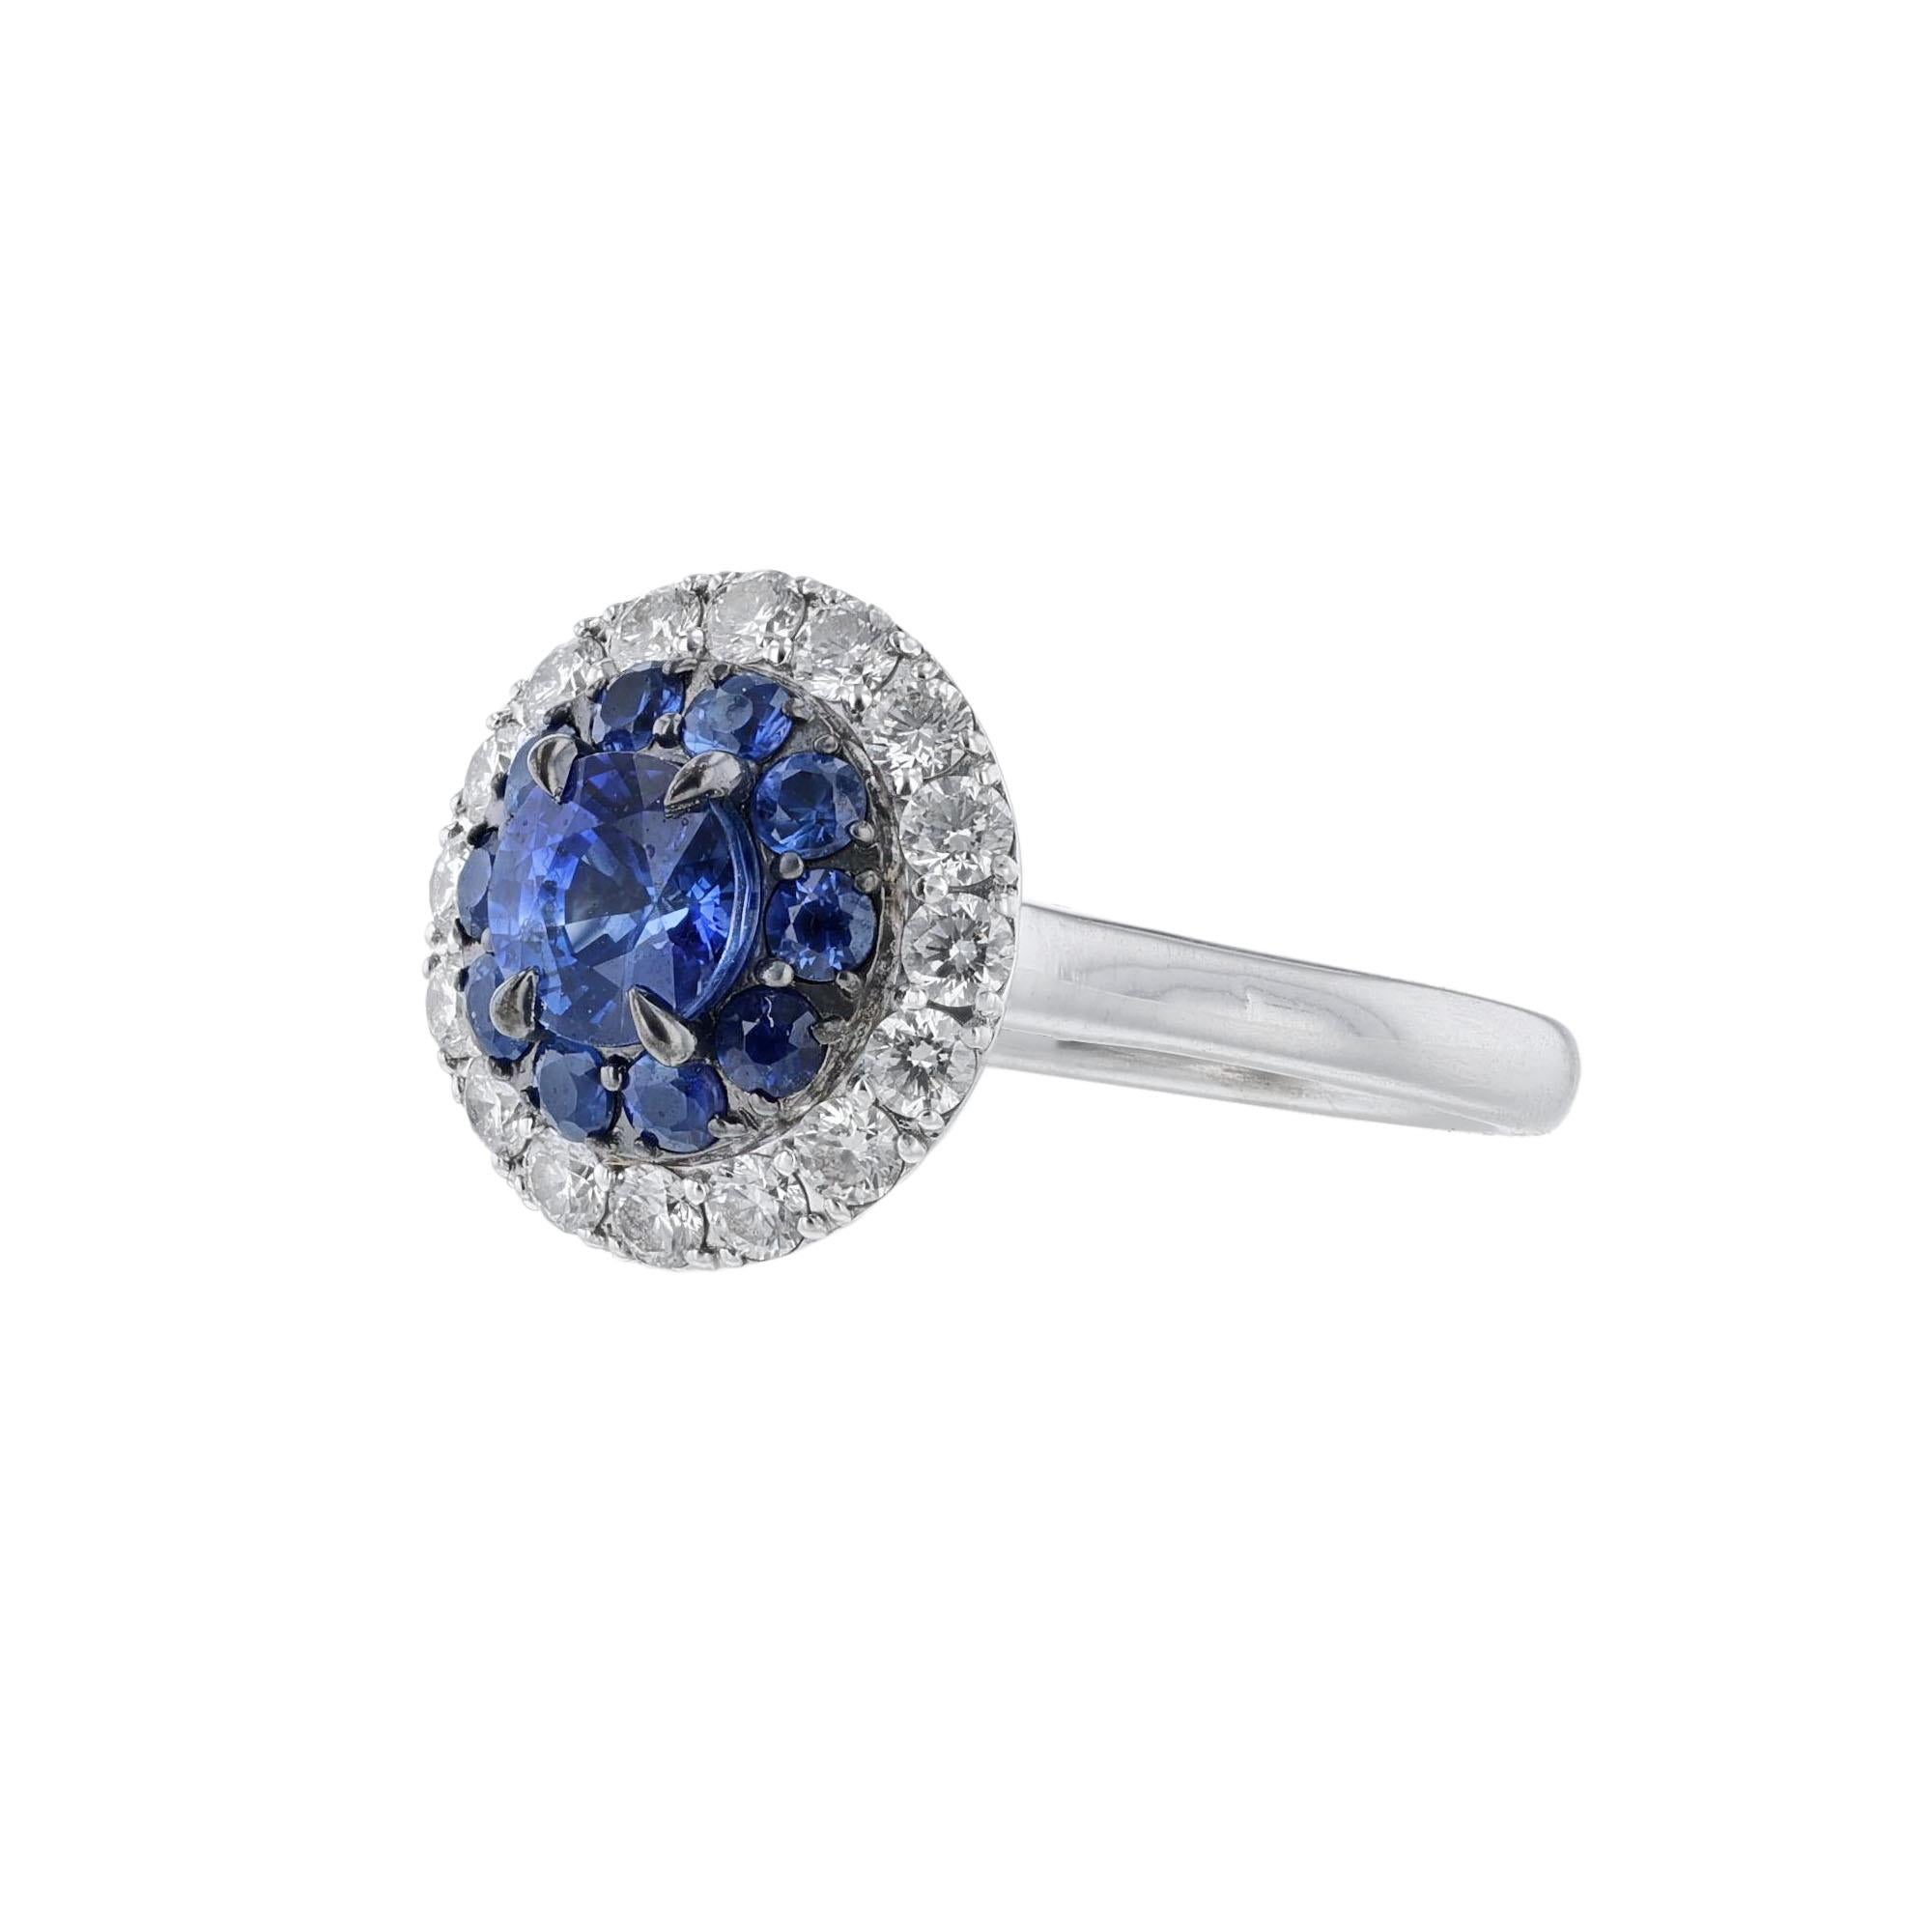 This ring is made in 14K white gold and features 1 center round blue sapphire weighing 1.12 carats. Surrounded by a halo of round cut blue sapphires weighing 0.55 carat. A secondary halo of round cut diamonds and 10 diamonds on each side of the